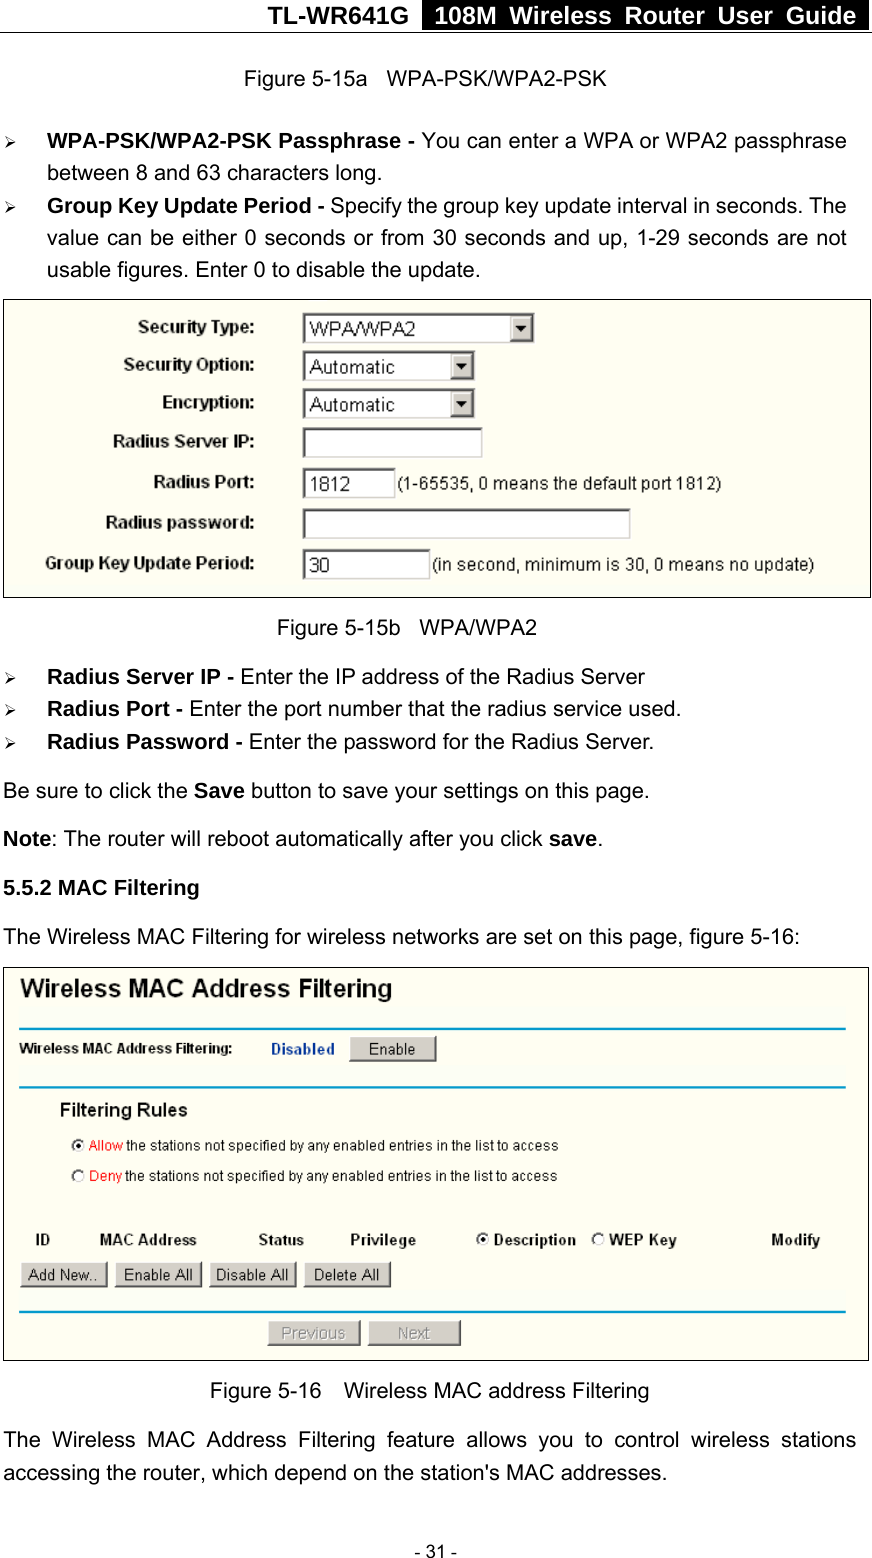 TL-WR641G   108M Wireless Router User Guide  Figure 5-15a  WPA-PSK/WPA2-PSK ¾ WPA-PSK/WPA2-PSK Passphrase - You can enter a WPA or WPA2 passphrase between 8 and 63 characters long. ¾ Group Key Update Period - Specify the group key update interval in seconds. The value can be either 0 seconds or from 30 seconds and up, 1-29 seconds are not usable figures. Enter 0 to disable the update.              Figure 5-15b  WPA/WPA2 ¾ Radius Server IP - Enter the IP address of the Radius Server ¾ Radius Port - Enter the port number that the radius service used. ¾ Radius Password - Enter the password for the Radius Server. Be sure to click the Save button to save your settings on this page. Note: The router will reboot automatically after you click save. 5.5.2 MAC Filtering   The Wireless MAC Filtering for wireless networks are set on this page, figure 5-16:  Figure 5-16    Wireless MAC address Filtering The Wireless MAC Address Filtering feature allows you to control wireless stations accessing the router, which depend on the station&apos;s MAC addresses.    - 31 - 